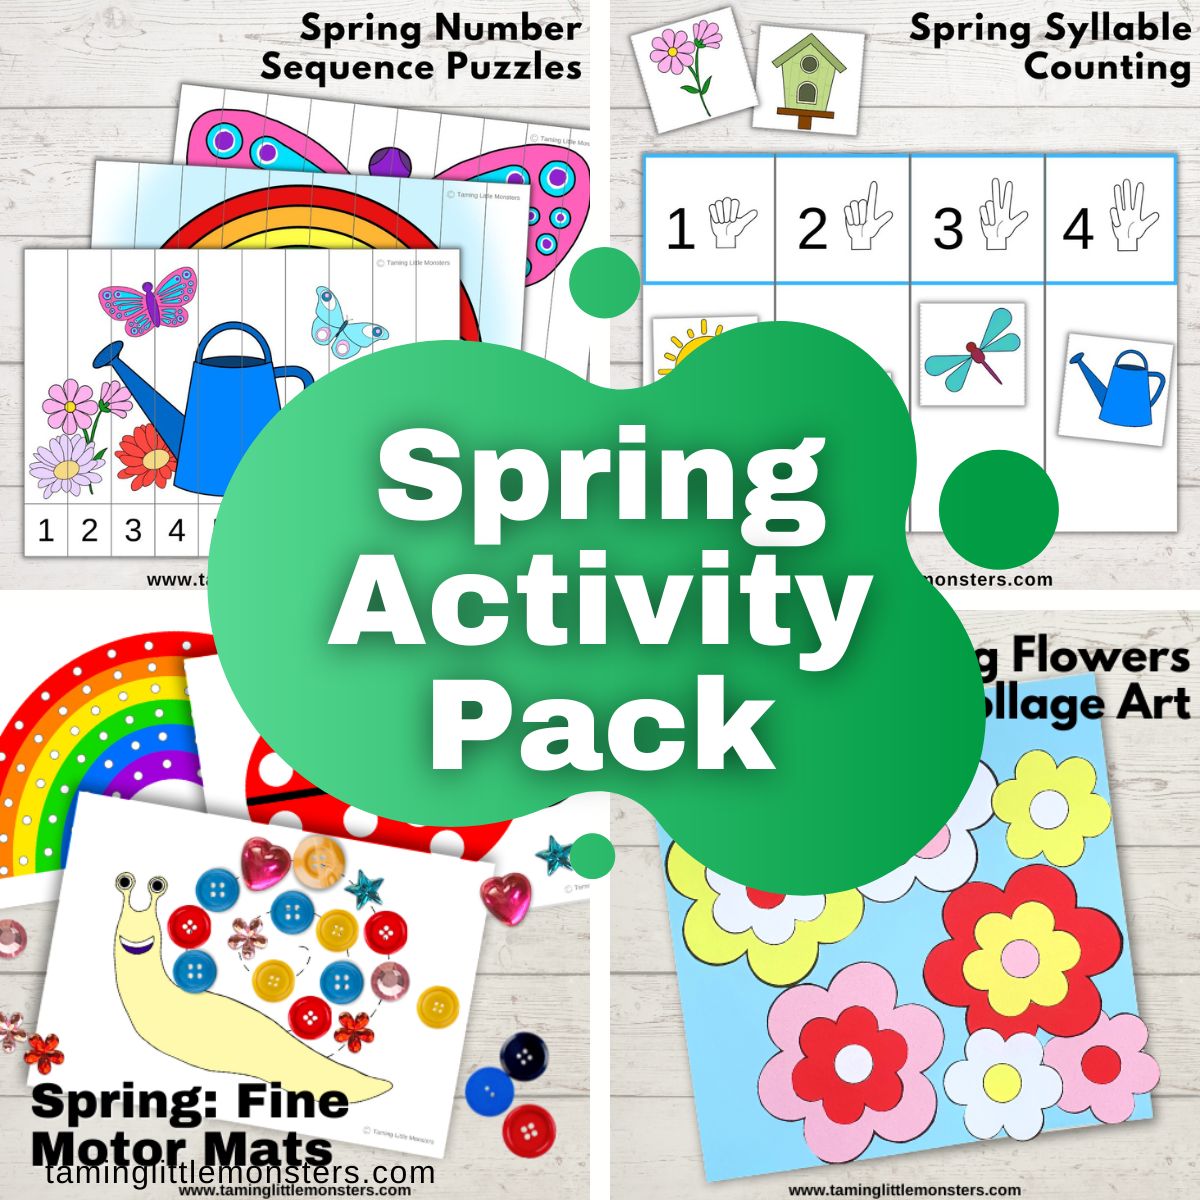 Spring activity pack for preschoolers. Spring themed math, literacy, fine motor, games and arts and crafts templates for preschool and kindergarten.